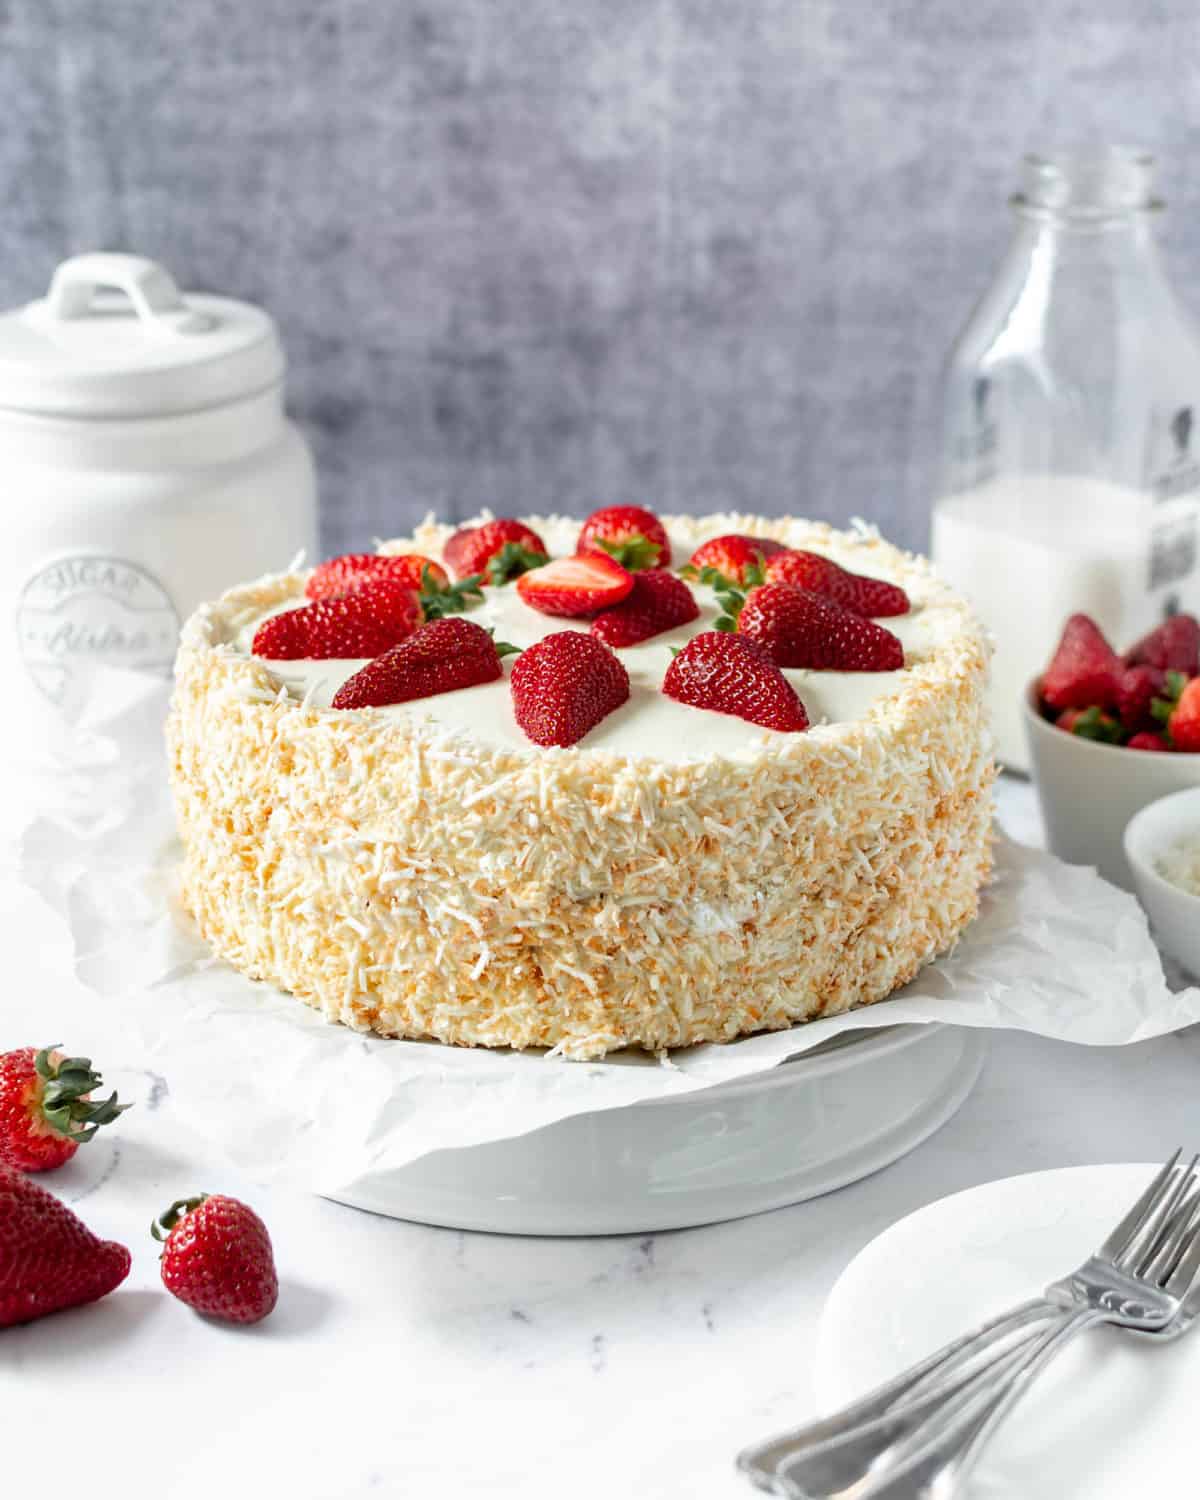 A completed coconut strawberry cake on a cake stand.